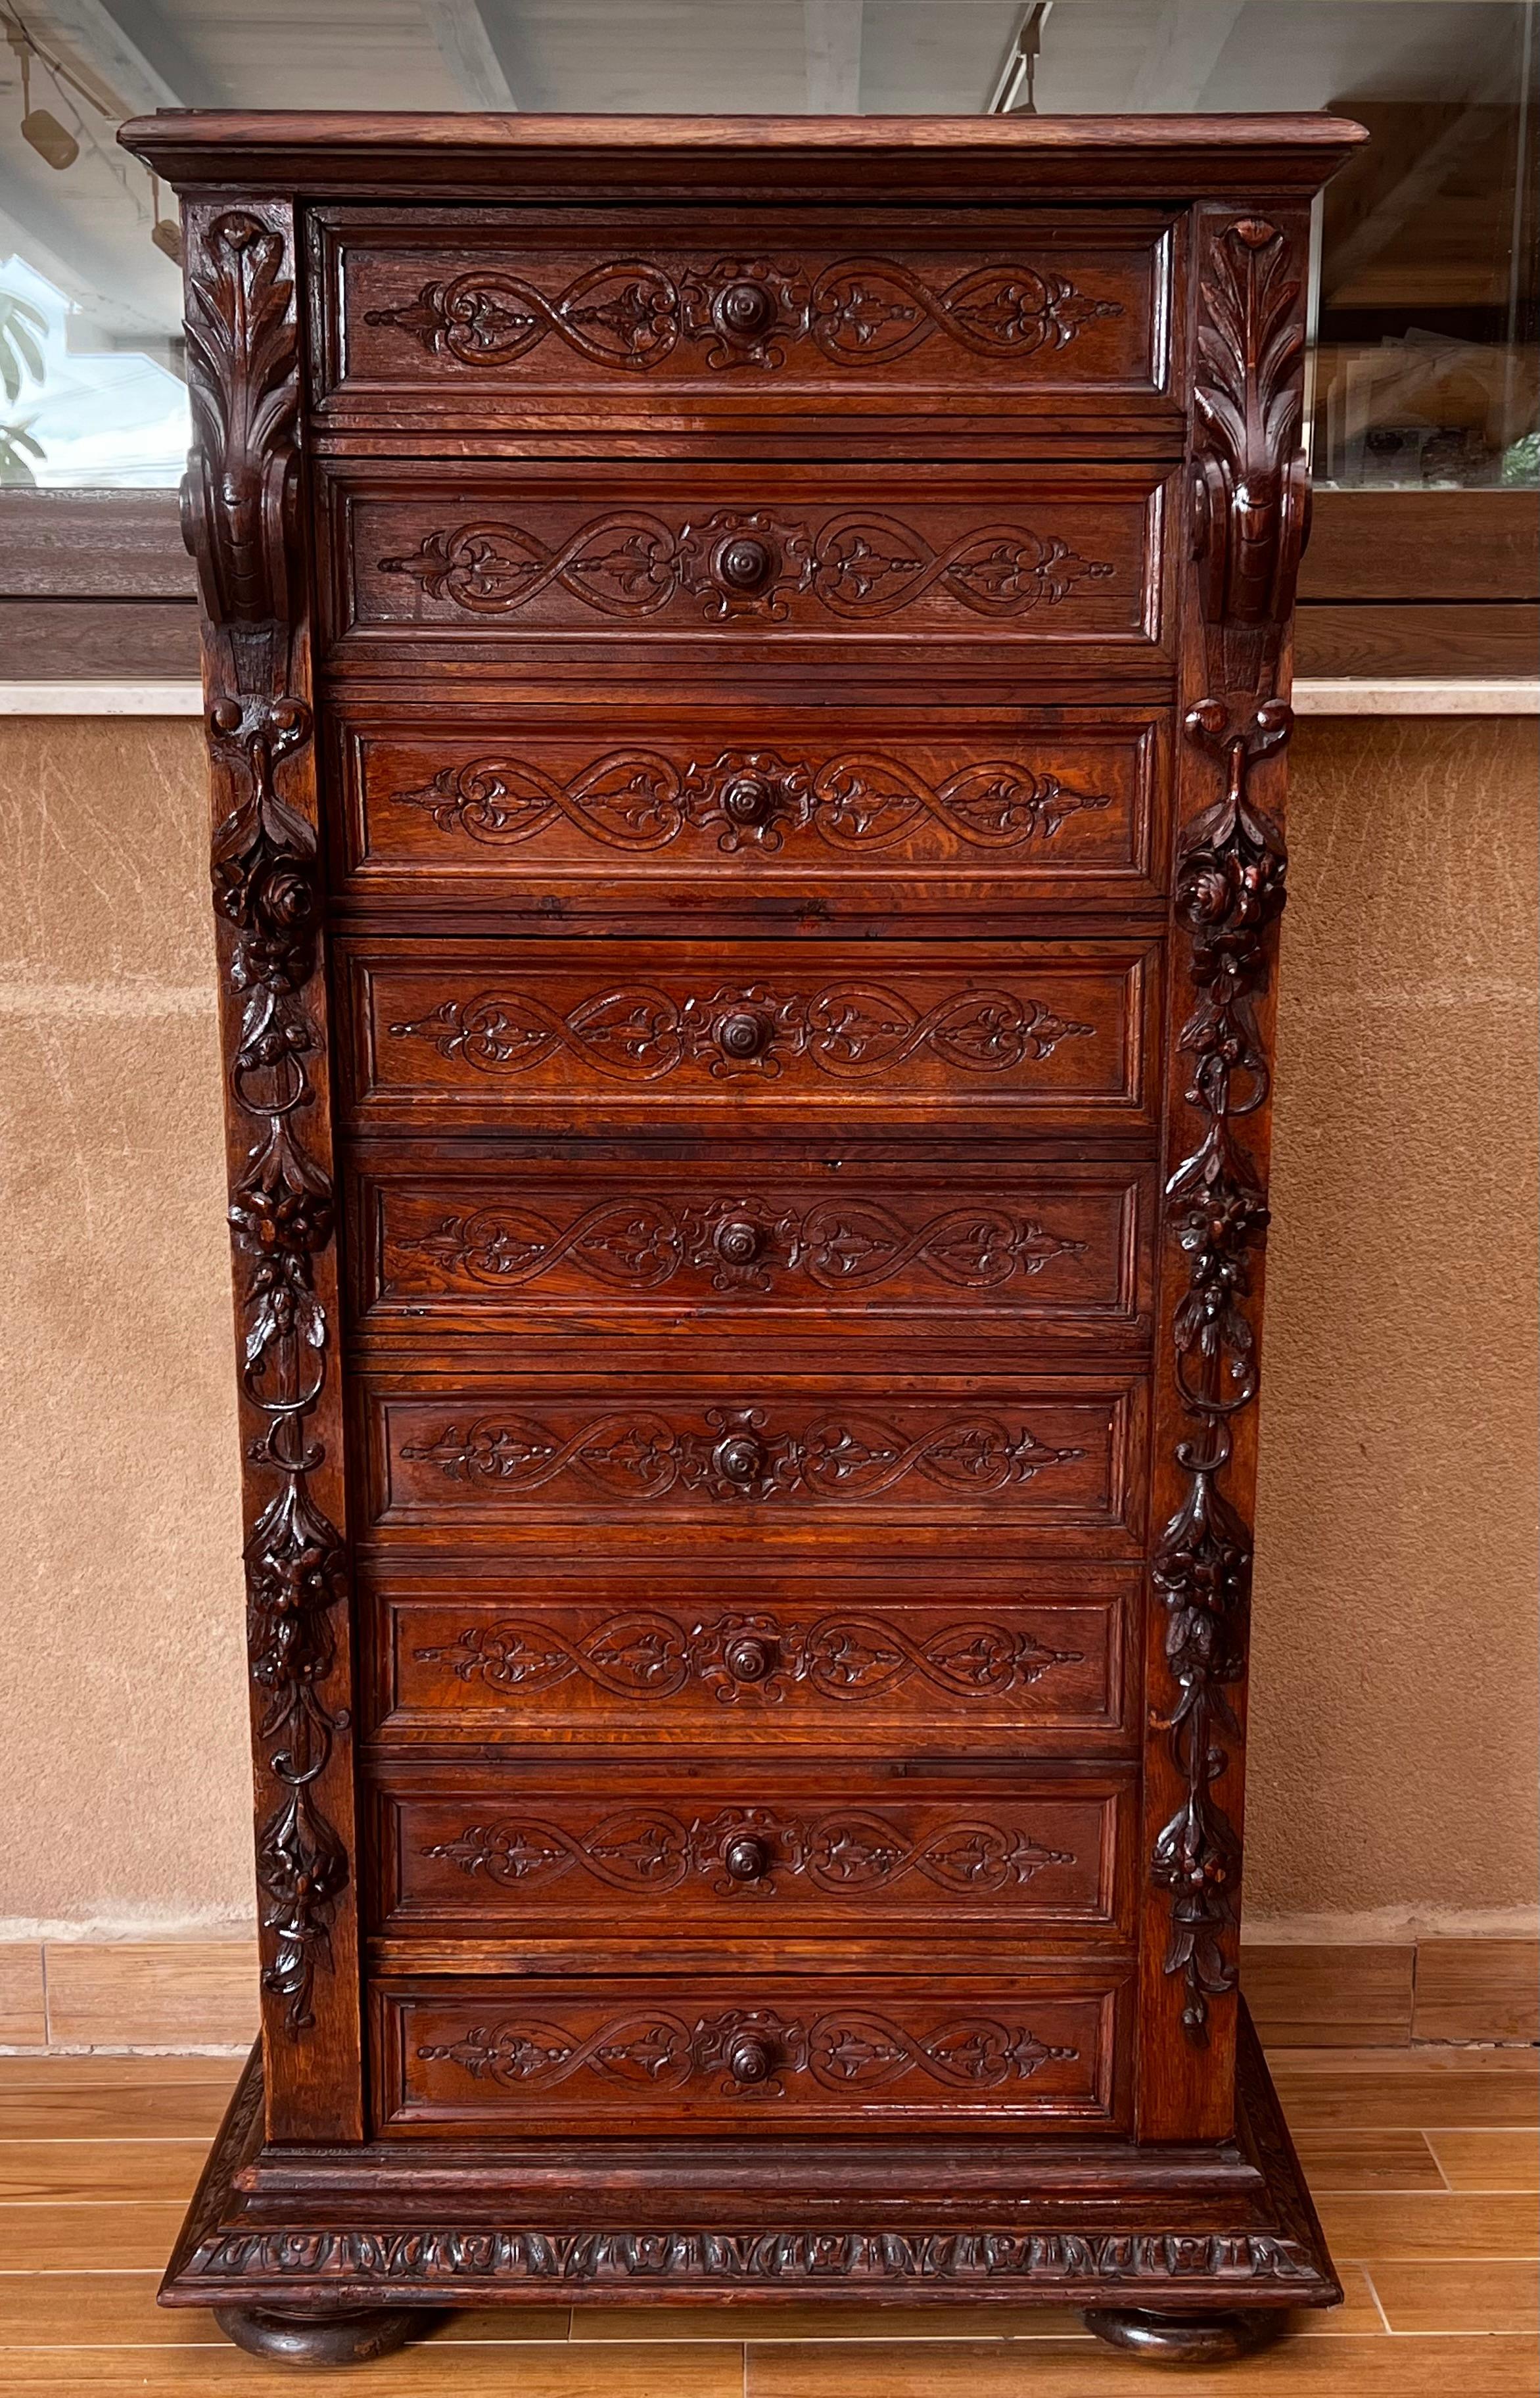 Extremely sturdy, almost completely original. Constructed using mortis and Tenon joints, horse glue and forged iron nails. Uprights are heavily carved with hanging garland and scroll motifs. Drawer fronts are adorned with flattened foliage carved in